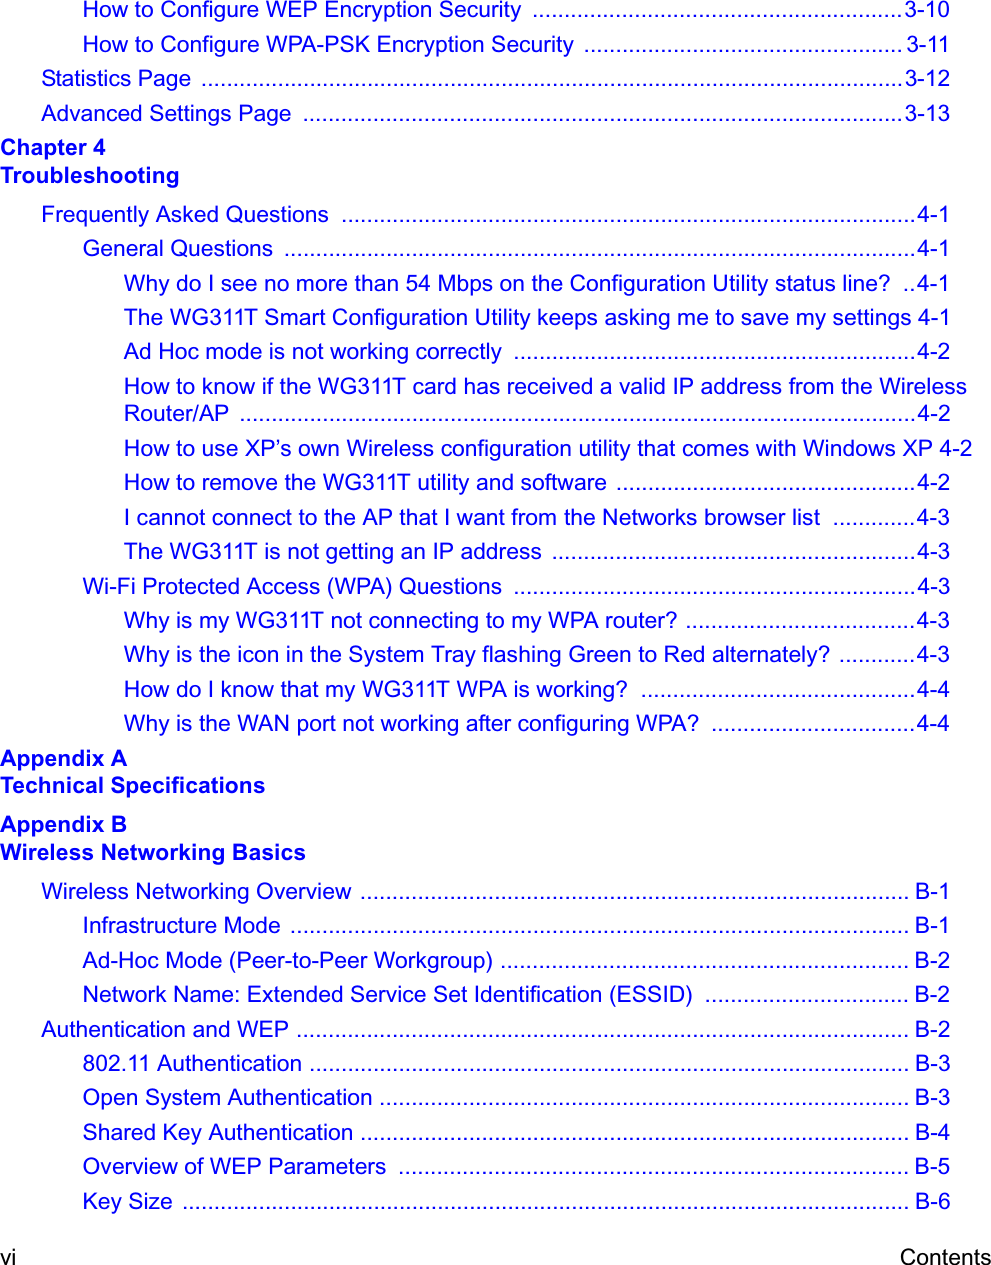 vi ContentsHow to Configure WEP Encryption Security  ..........................................................3-10How to Configure WPA-PSK Encryption Security  .................................................. 3-11Statistics Page  ..............................................................................................................3-12Advanced Settings Page  ..............................................................................................3-13Chapter 4 TroubleshootingFrequently Asked Questions  ..........................................................................................4-1General Questions  ...................................................................................................4-1Why do I see no more than 54 Mbps on the Configuration Utility status line?  ..4-1The WG311T Smart Configuration Utility keeps asking me to save my settings 4-1Ad Hoc mode is not working correctly  ...............................................................4-2How to know if the WG311T card has received a valid IP address from the Wireless Router/AP ..........................................................................................................4-2How to use XP’s own Wireless configuration utility that comes with Windows XP 4-2How to remove the WG311T utility and software ...............................................4-2I cannot connect to the AP that I want from the Networks browser list  .............4-3The WG311T is not getting an IP address  .........................................................4-3Wi-Fi Protected Access (WPA) Questions  ...............................................................4-3Why is my WG311T not connecting to my WPA router? ....................................4-3Why is the icon in the System Tray flashing Green to Red alternately? ............4-3How do I know that my WG311T WPA is working?  ...........................................4-4Why is the WAN port not working after configuring WPA? ................................4-4Appendix A Technical SpecificationsAppendix B Wireless Networking BasicsWireless Networking Overview ...................................................................................... B-1Infrastructure Mode  ................................................................................................. B-1Ad-Hoc Mode (Peer-to-Peer Workgroup) ................................................................ B-2Network Name: Extended Service Set Identification (ESSID)  ................................ B-2Authentication and WEP ................................................................................................ B-2802.11 Authentication .............................................................................................. B-3Open System Authentication ................................................................................... B-3Shared Key Authentication ...................................................................................... B-4Overview of WEP Parameters  ................................................................................ B-5Key Size  .................................................................................................................. B-6